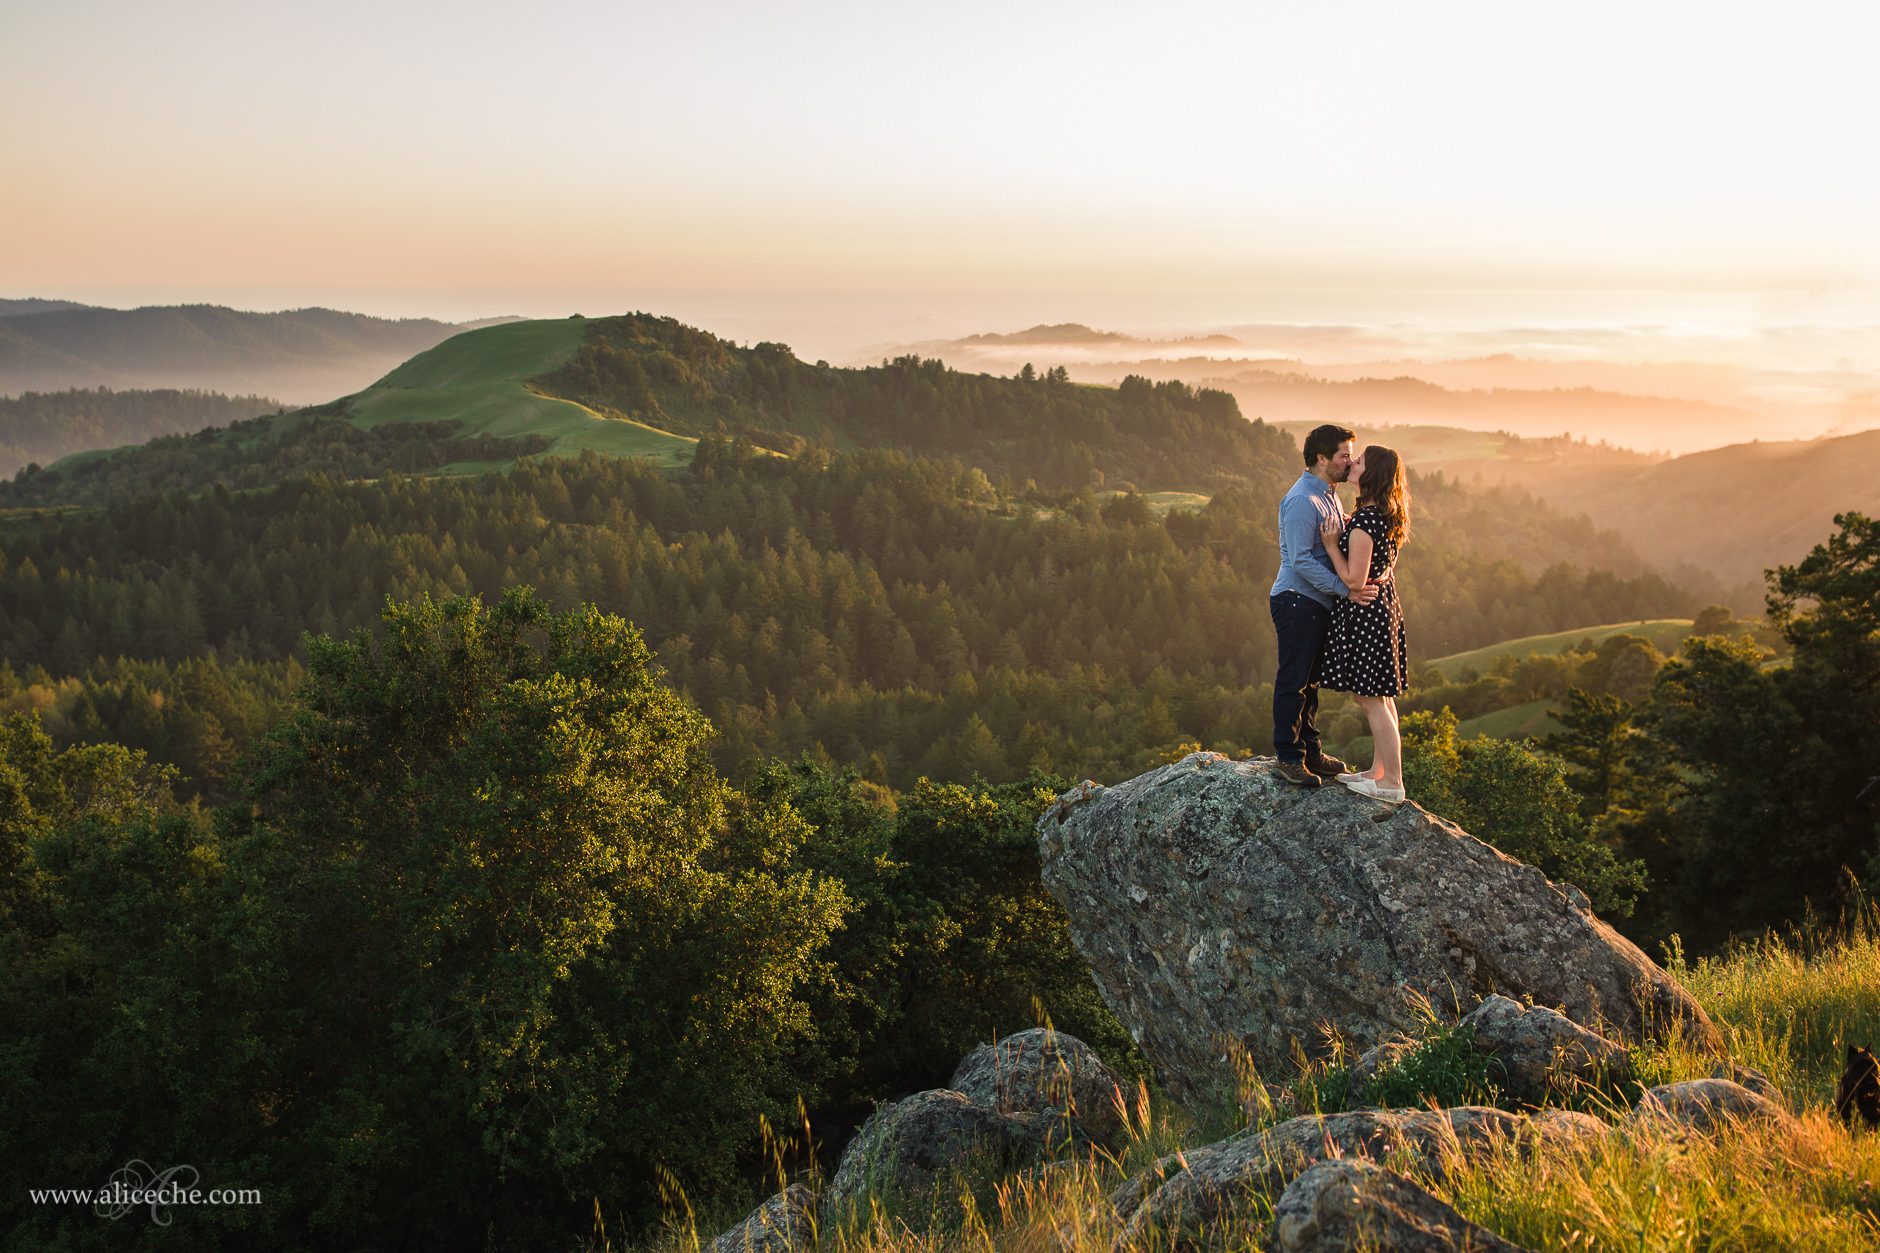 Bay Area Engagement Session at Sunset above misty hills